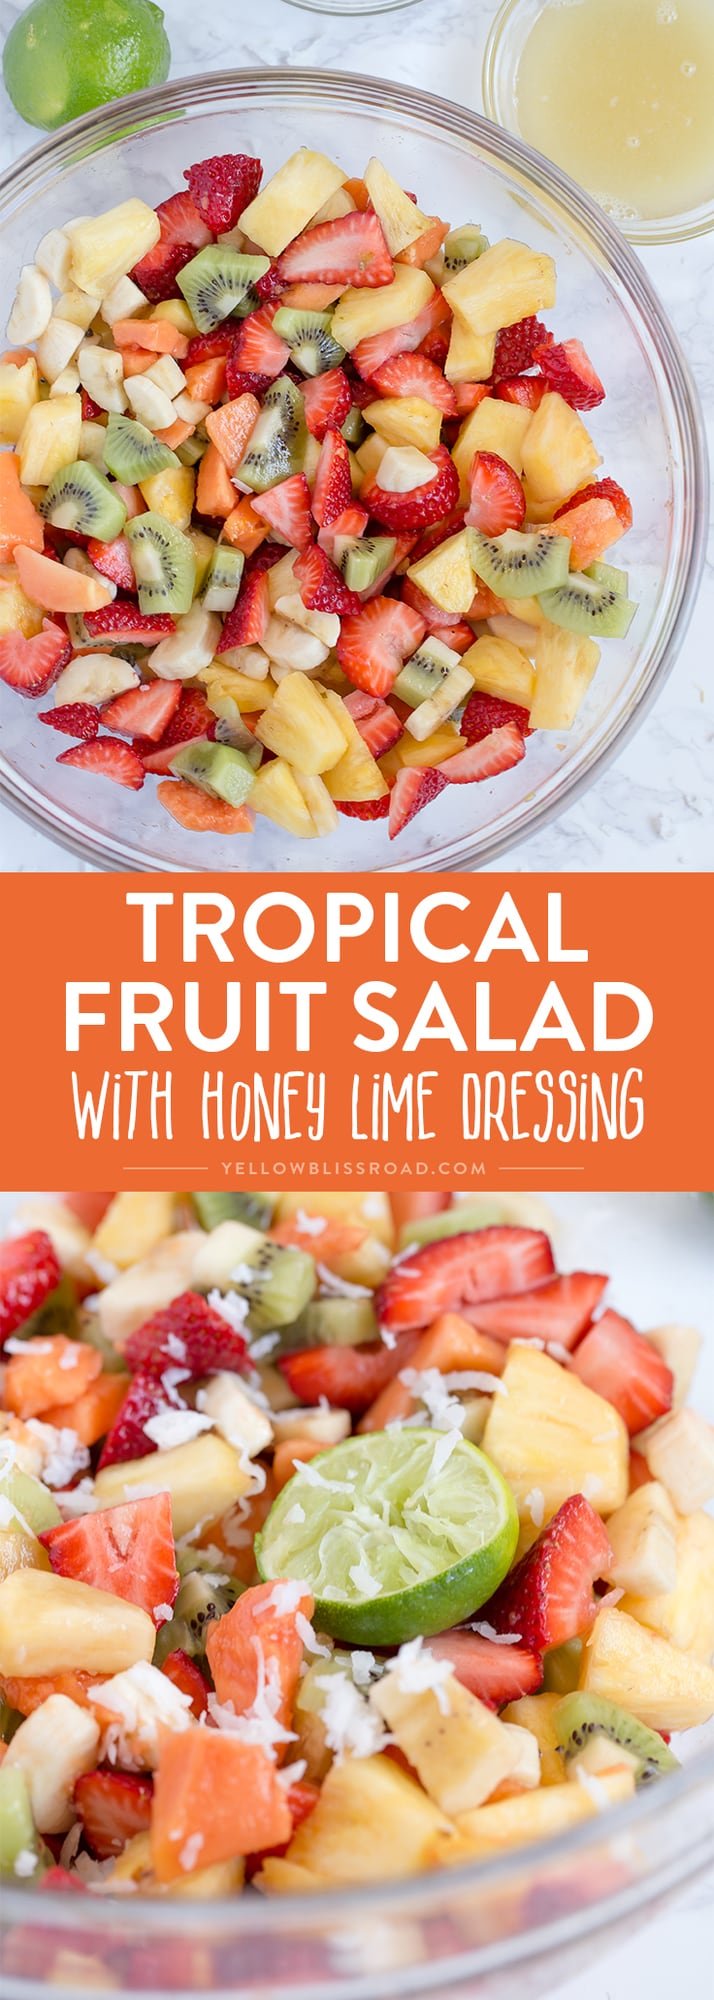 This Tropical Fruit Salad with Honey Lime Dressing is the light and refreshing and the perfect snack or side dish to any spring or summer meal